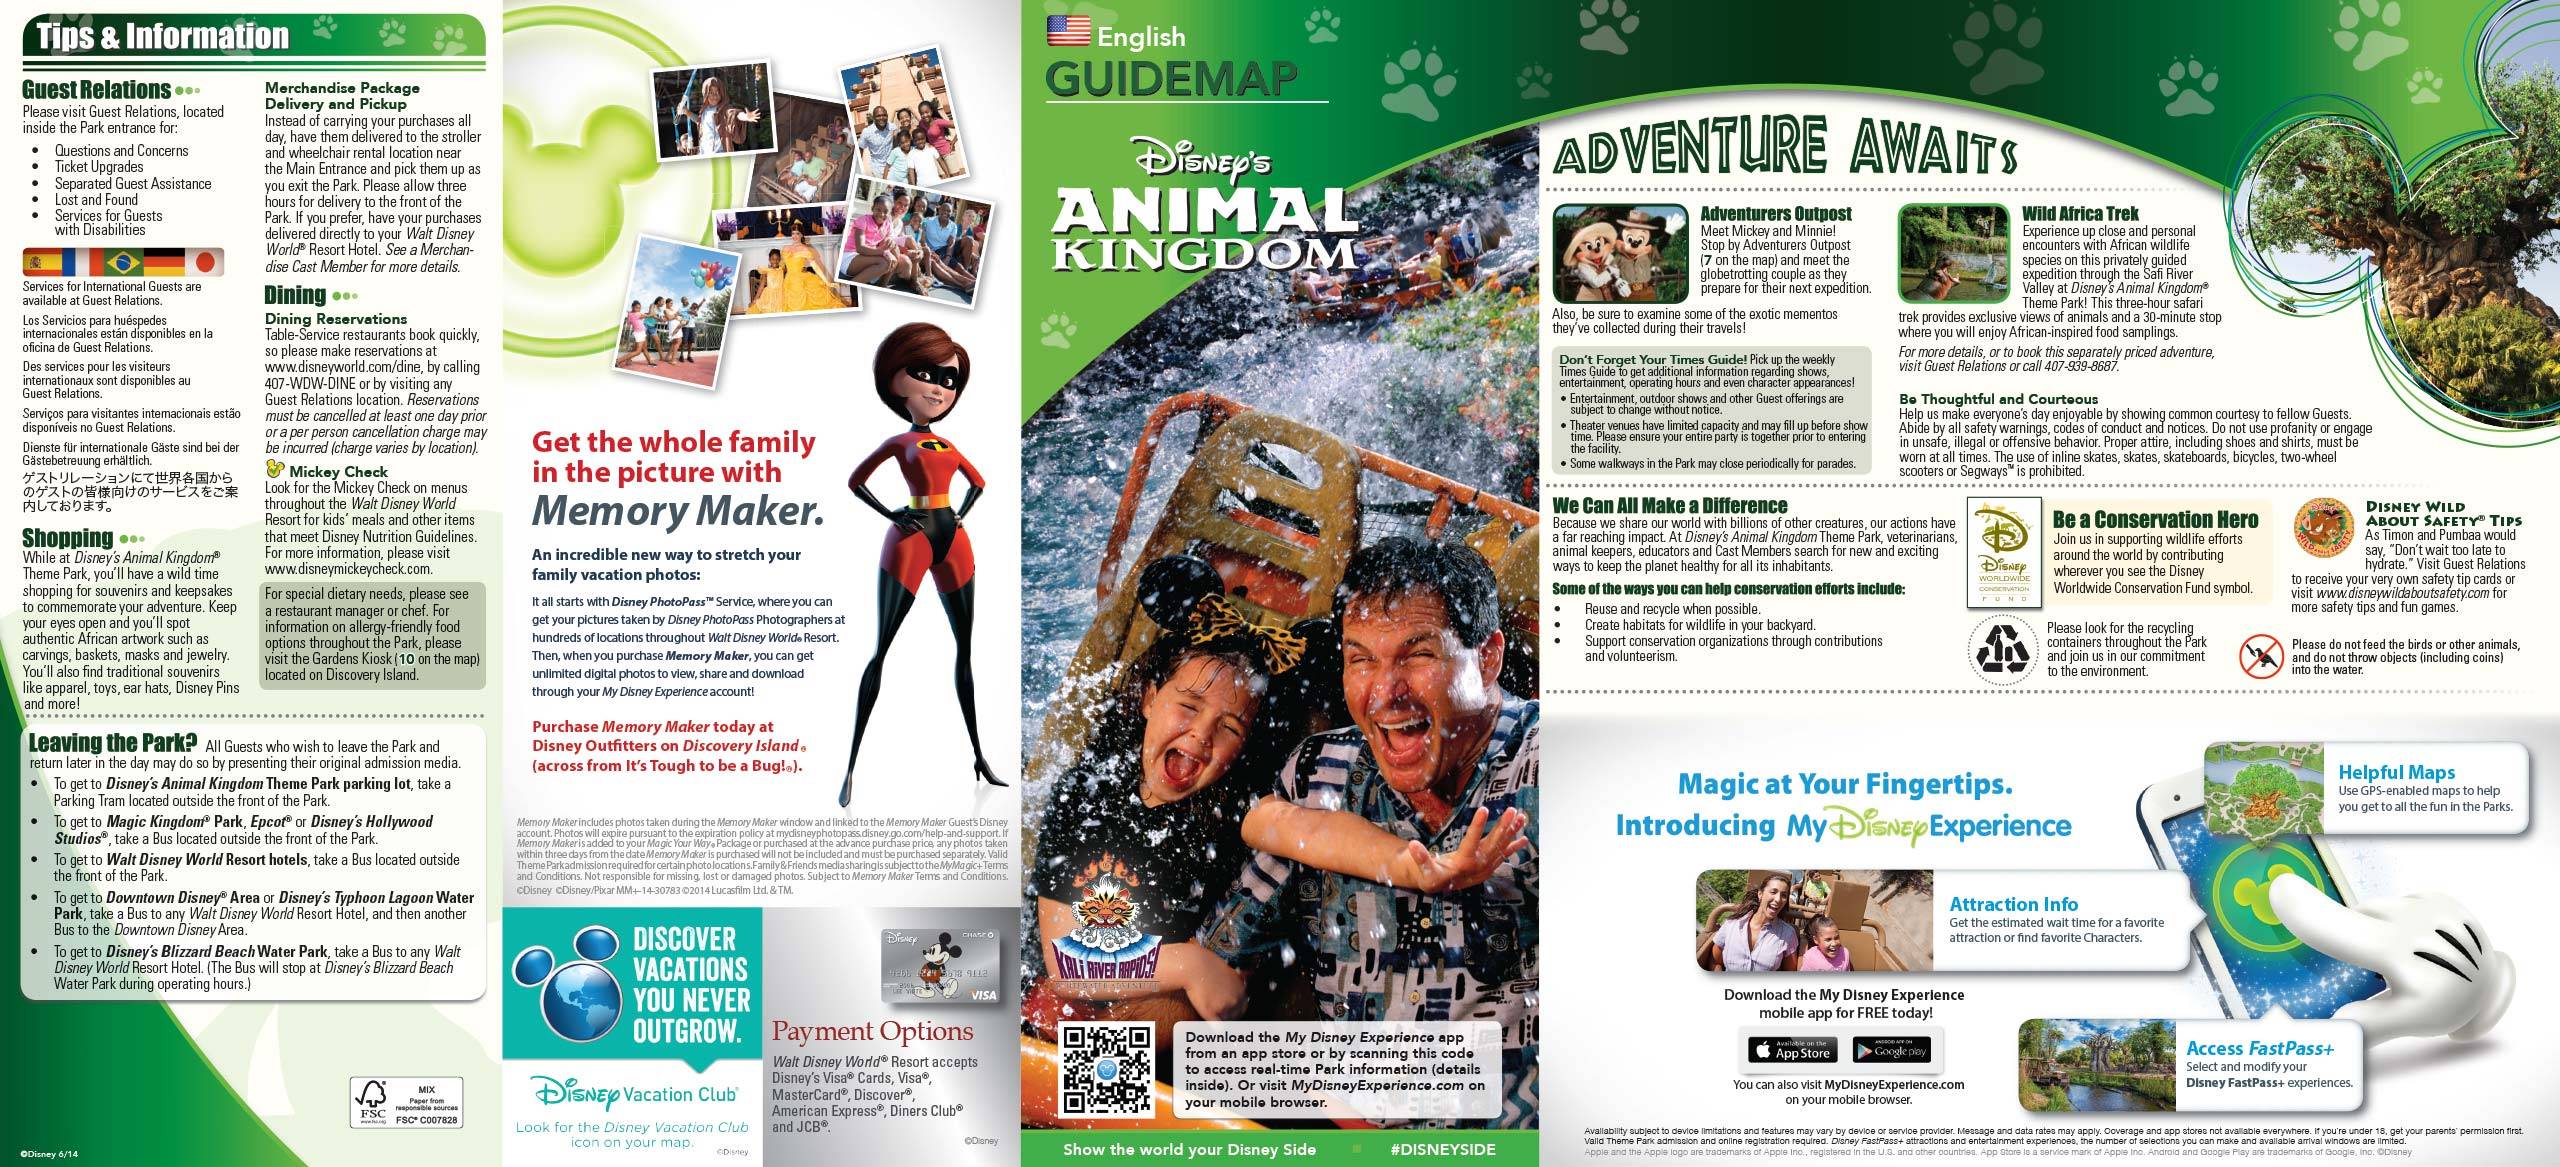 New Disney's Animal Kingdom Park Guide Map with Harambe Theater District addition